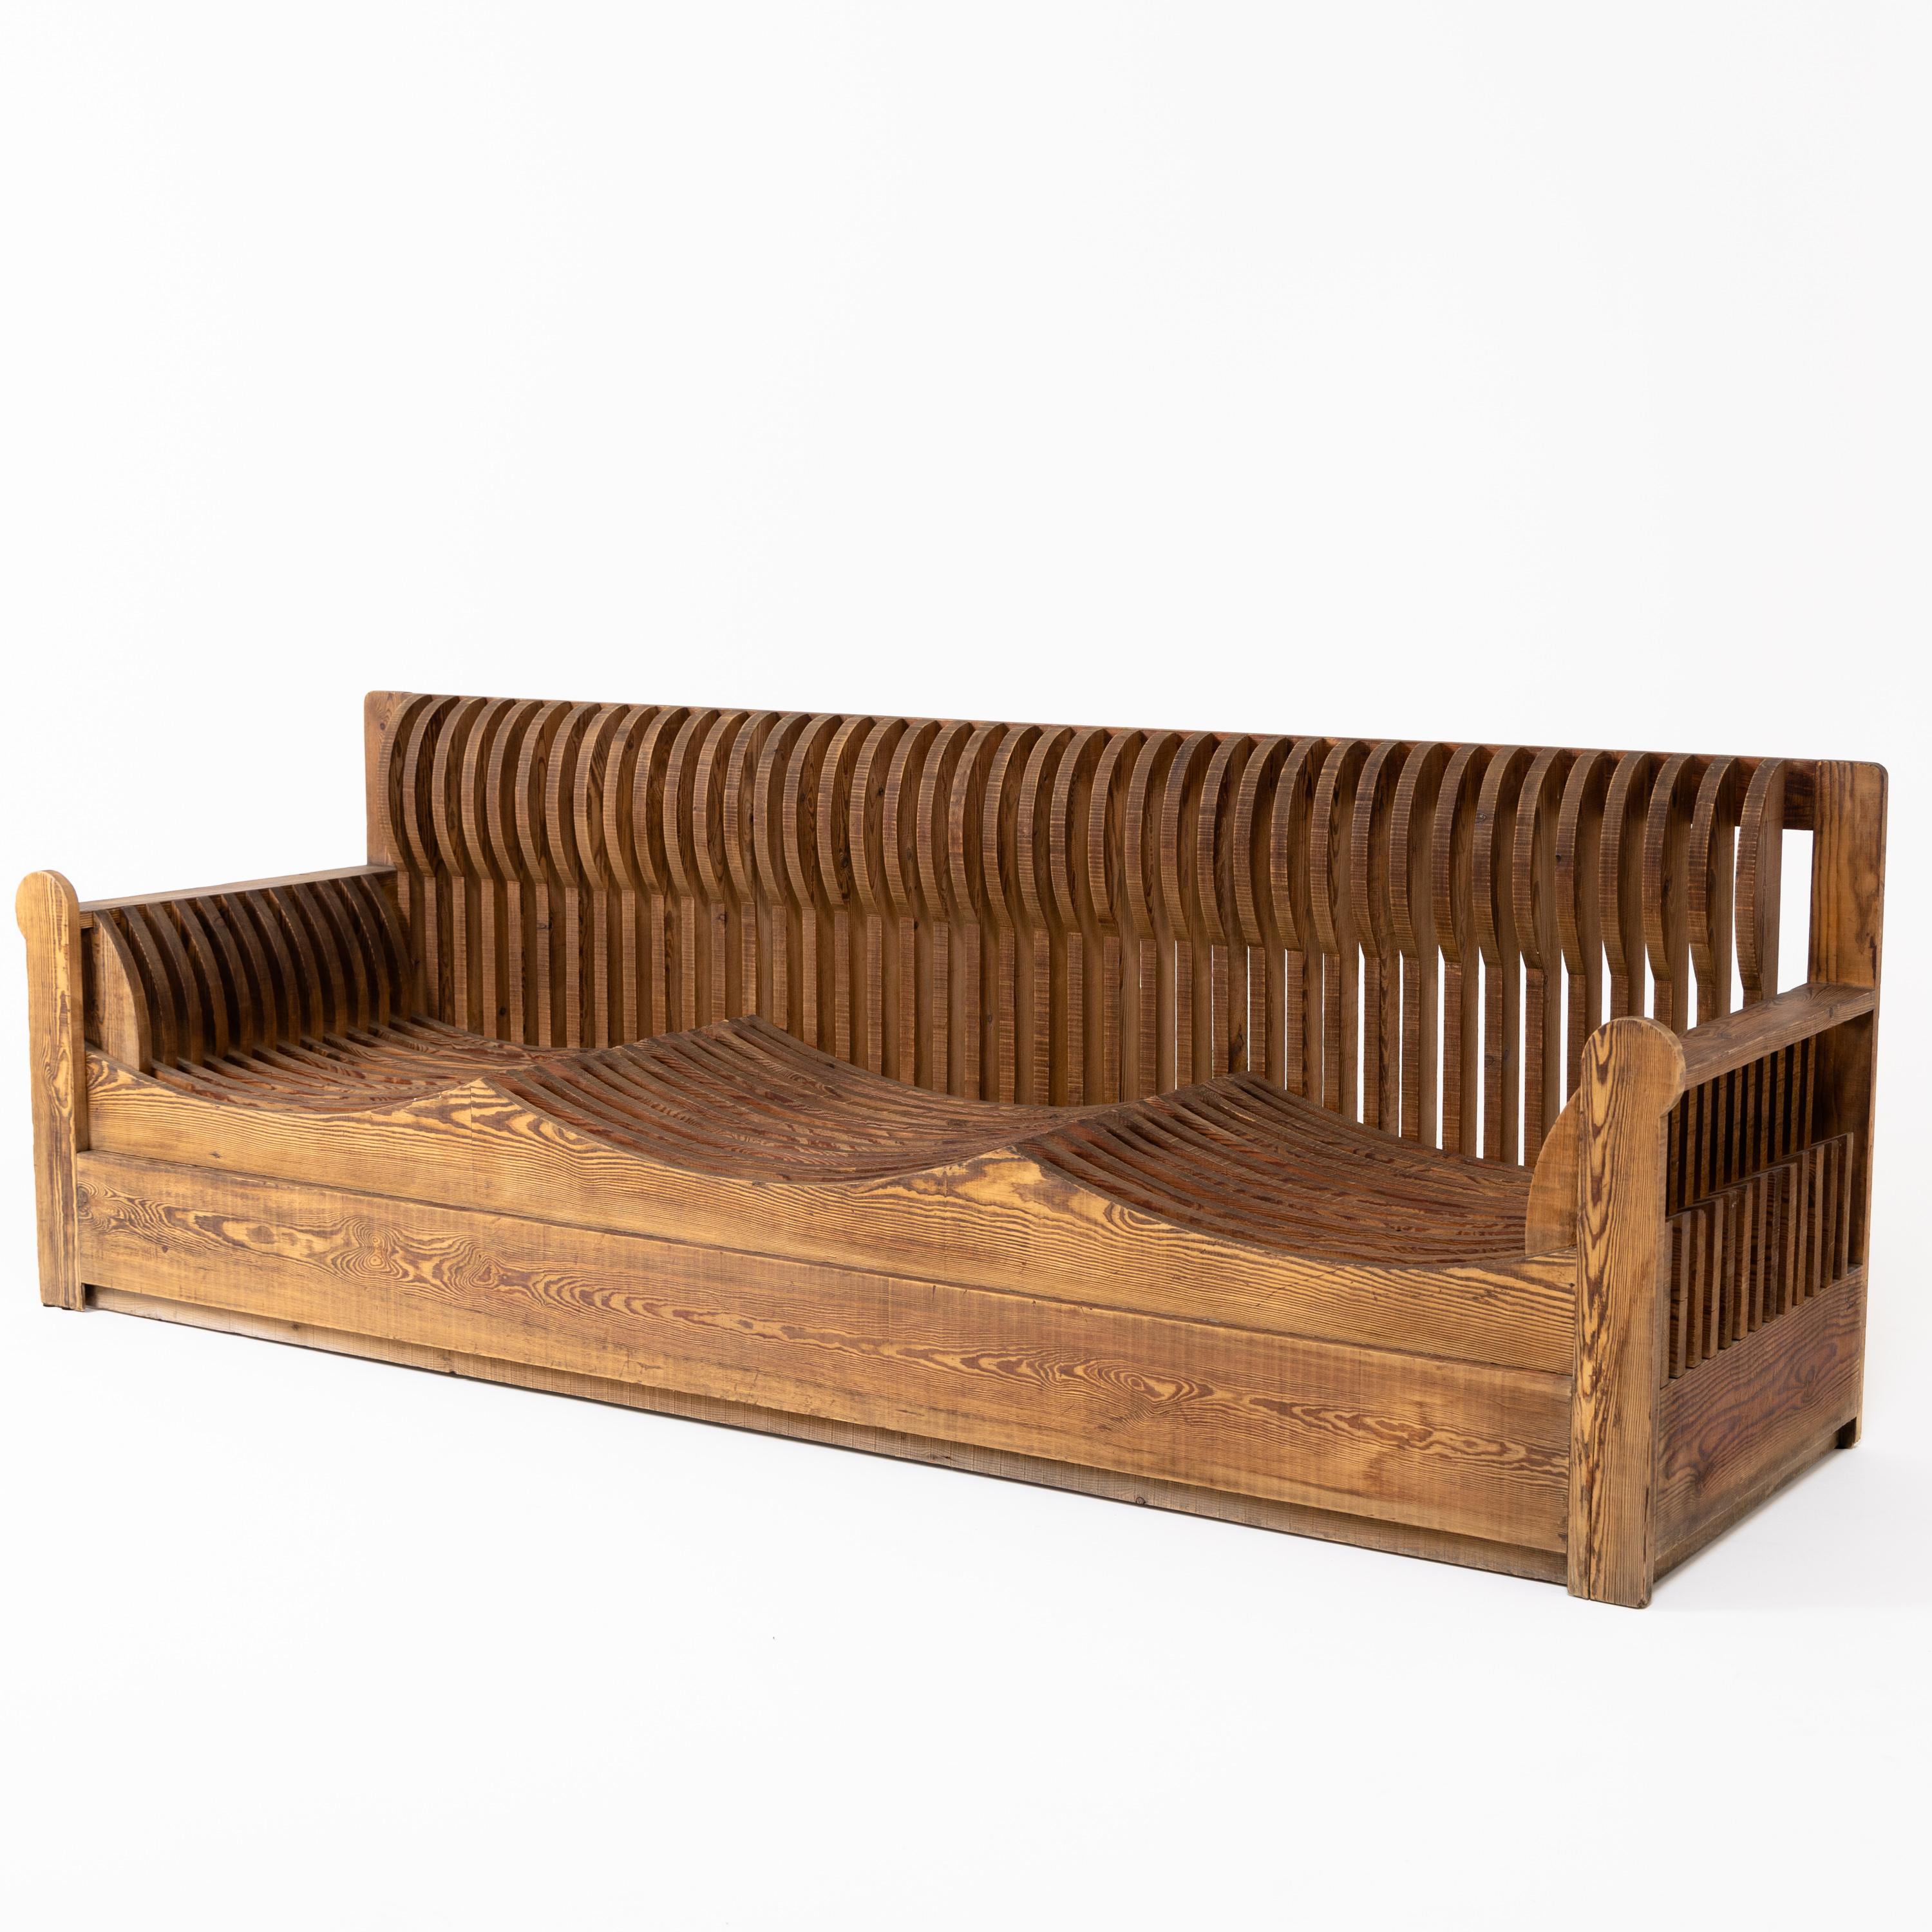 Large three-seat bench in pine of slatted construction with scalloped seat and back. Stamped Ceroli on the side.